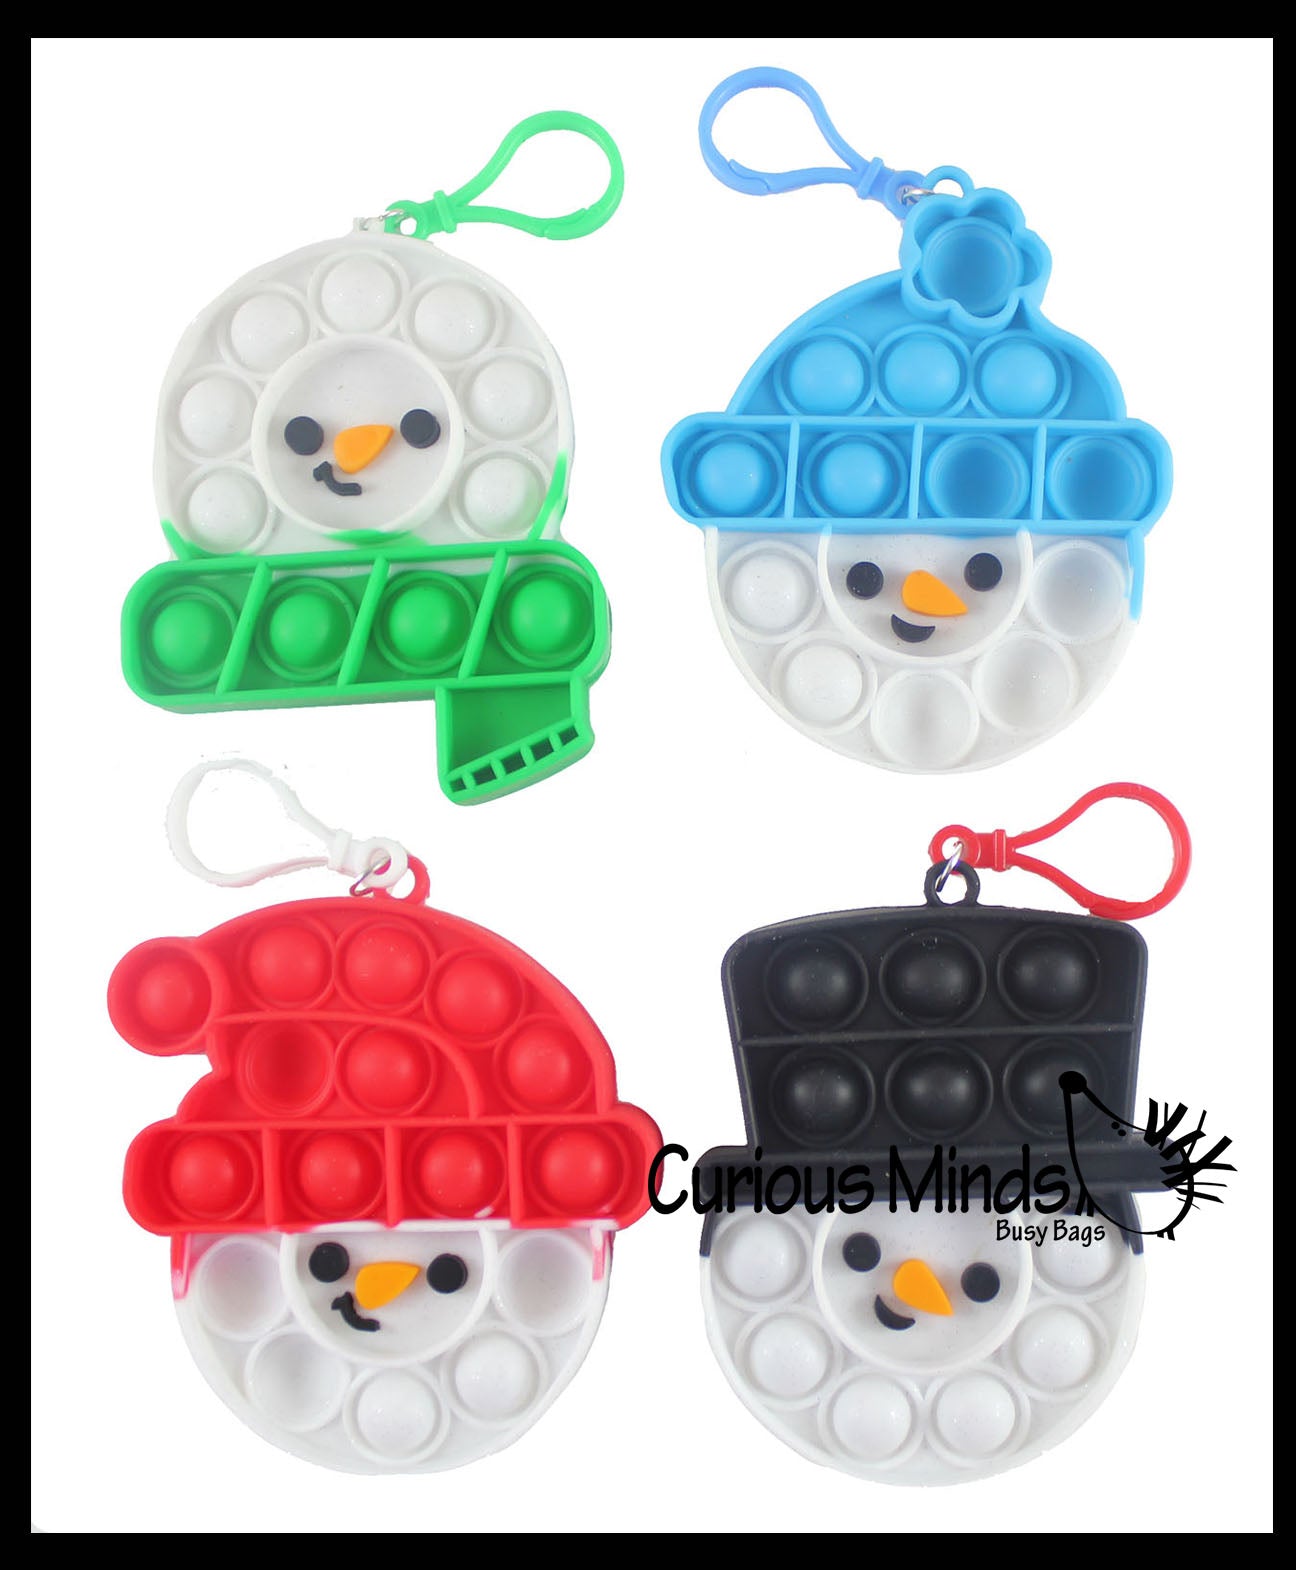 Set of 2 Cute Christmas Bubble Poppers - Snowman and Snowflake - Fidget Toy - Fun Party Favor Toy - Winter Holiday (Random Colors)